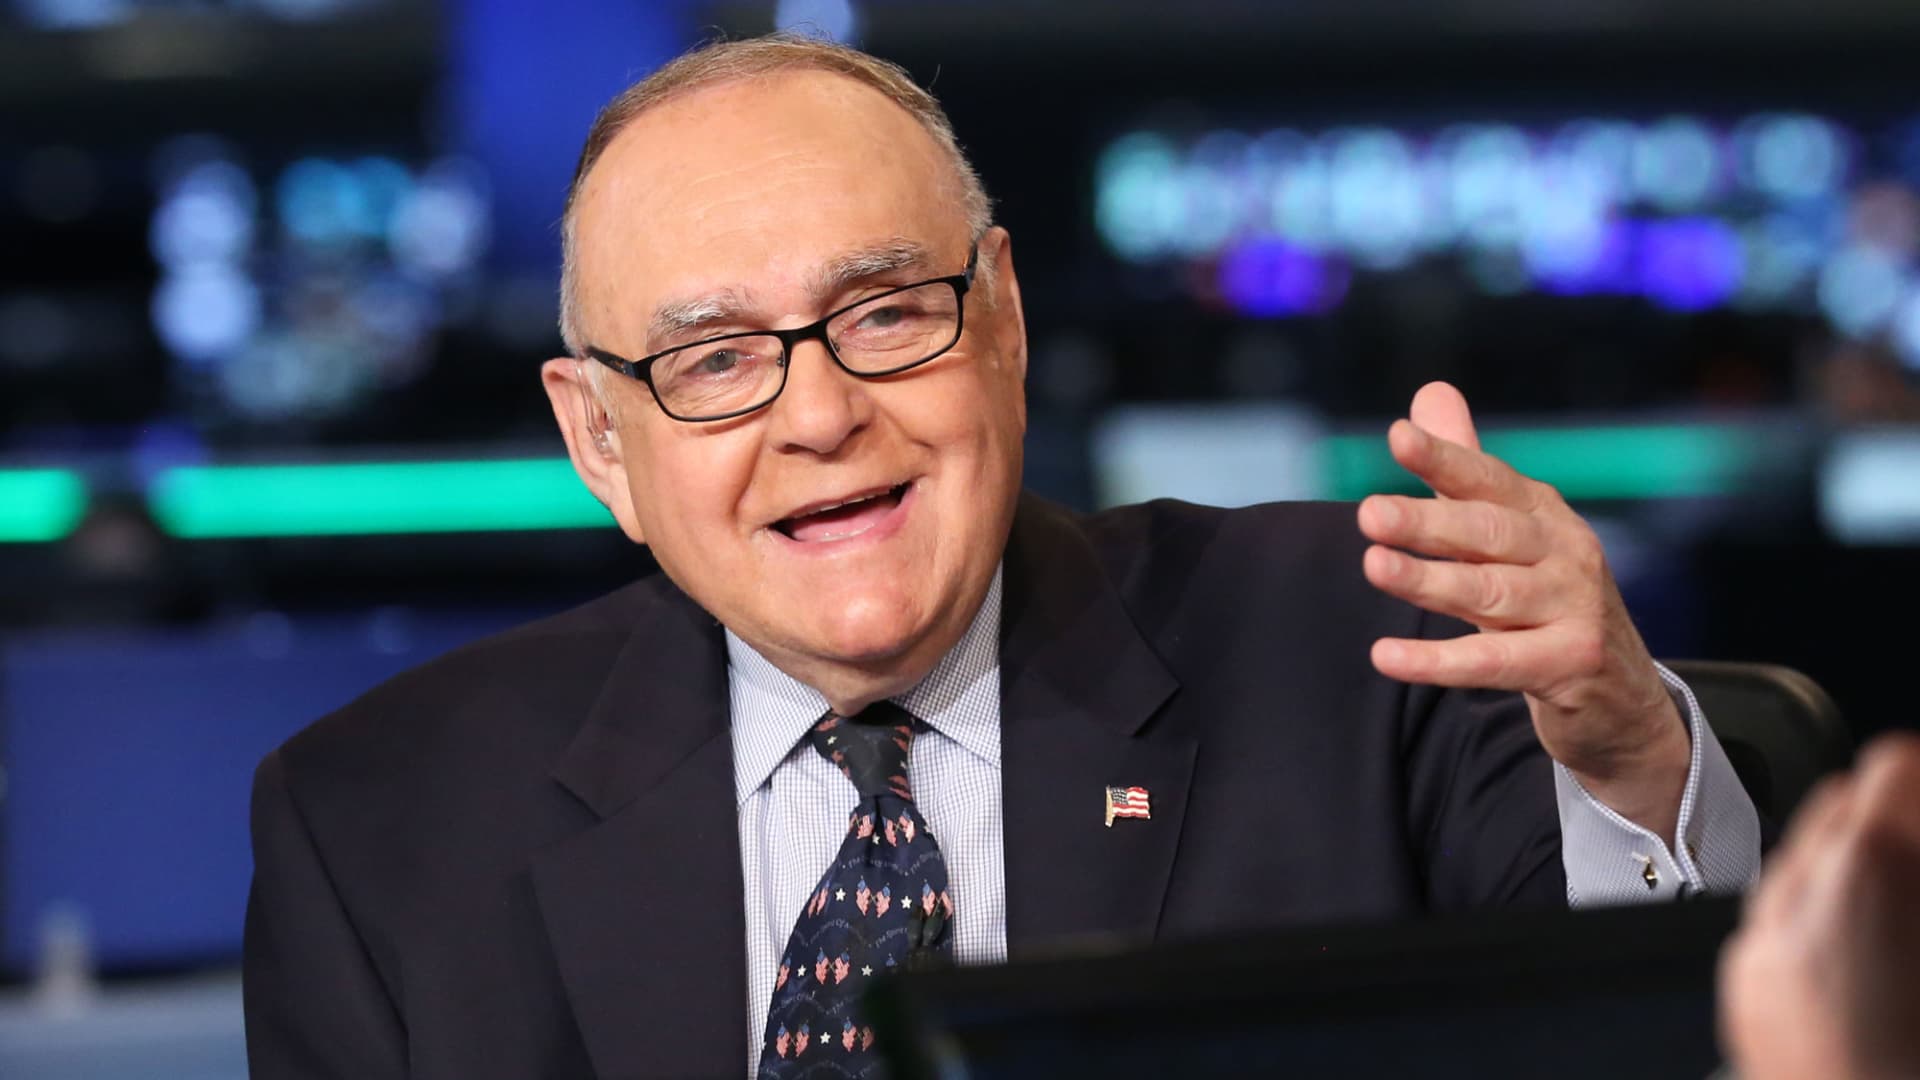 The US Financial Crisis Is Caused by Rising National Debt As per Billionaire Investor Leon Cooperman